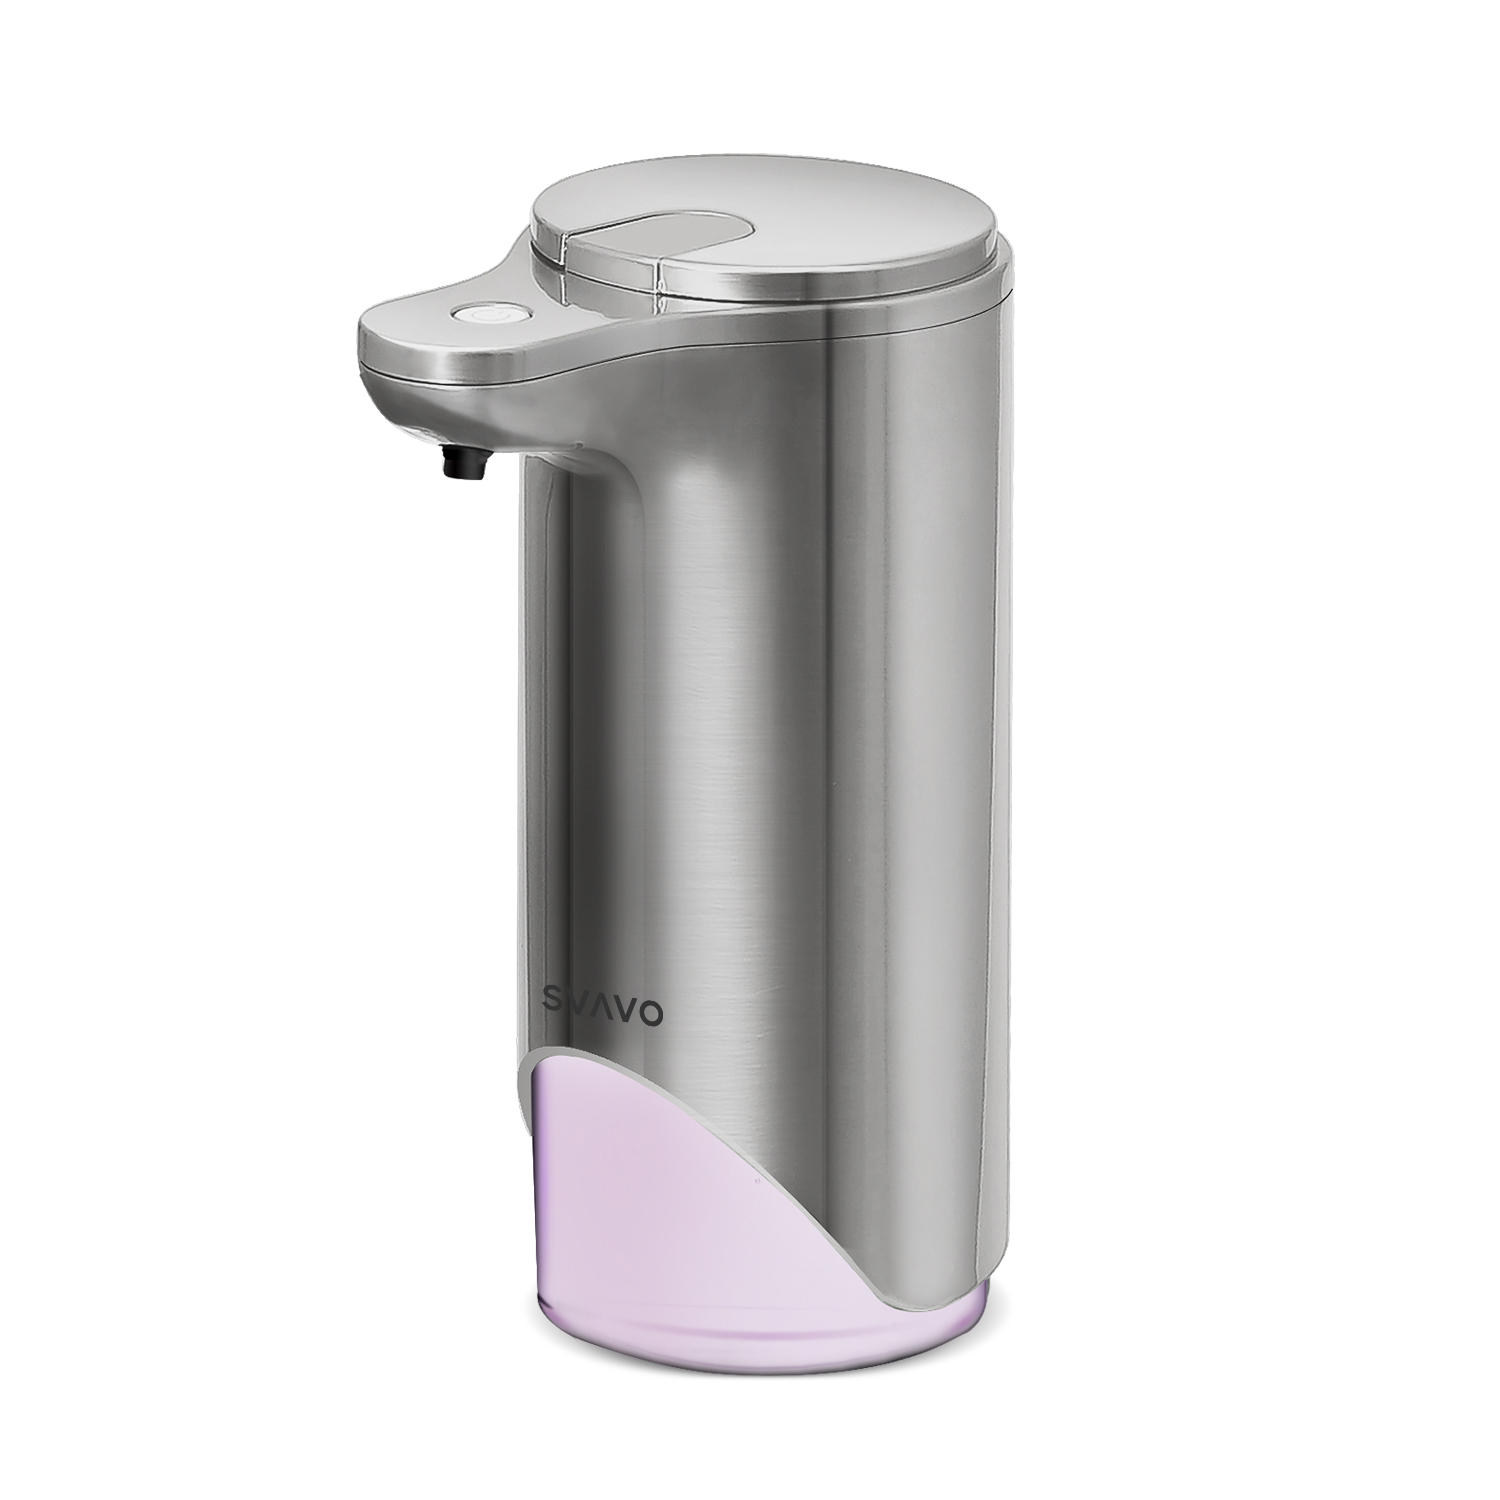 automatic wall mounted soap dispenser.jpg